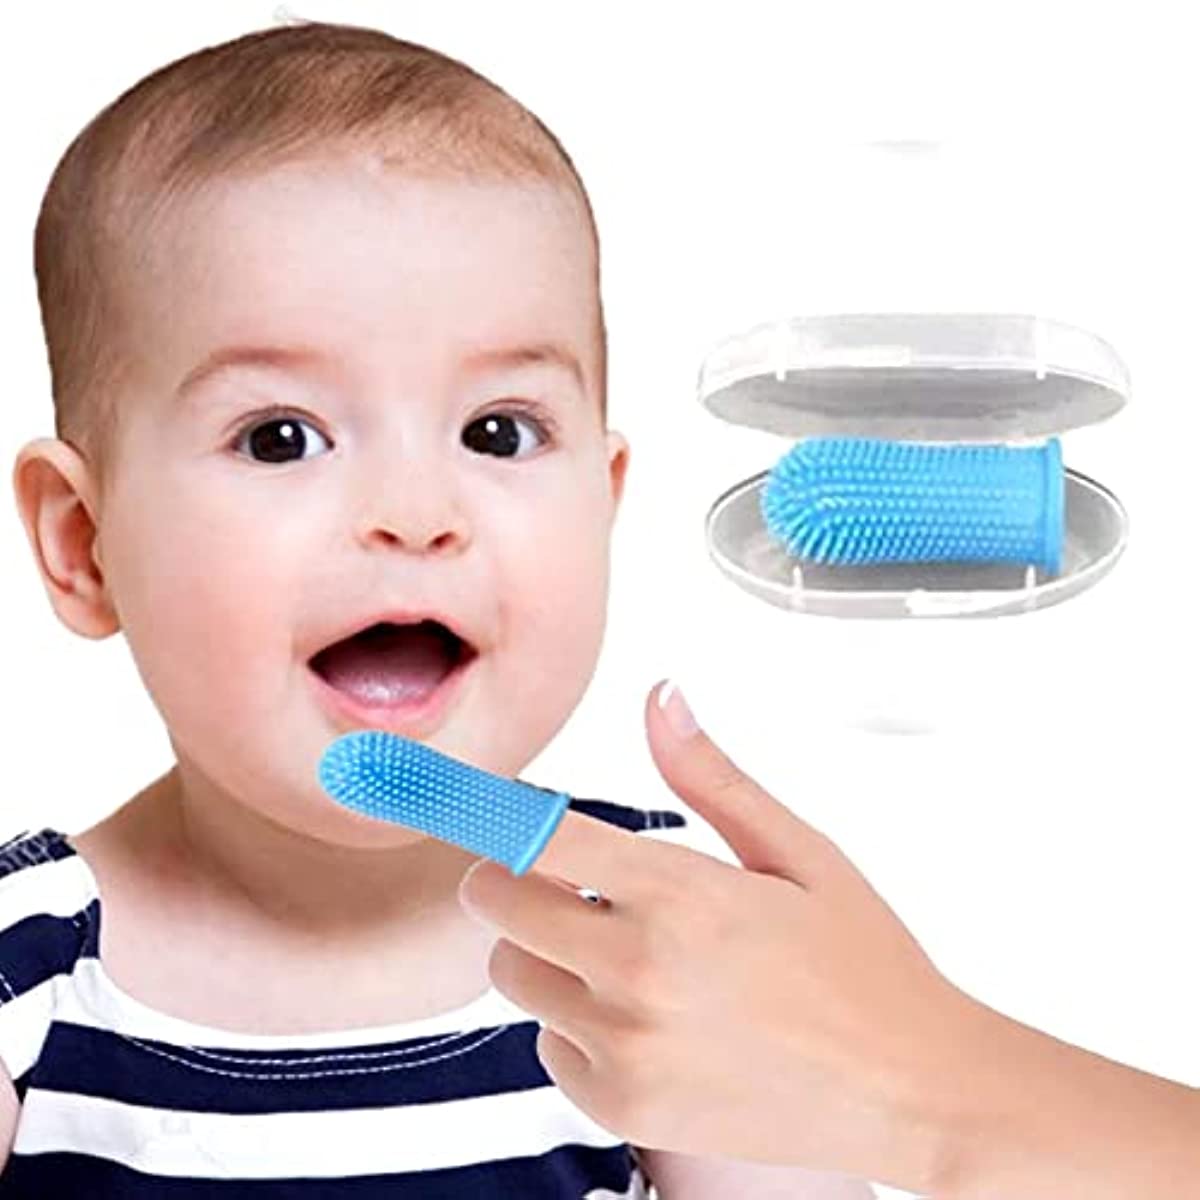 Silicone Baby Finger Toothbrush with 360° Bristles, Toddler Toothbrush Age 1-2, 100{6f0234061ce864f4be6eb94402f0ec8b7bd6ca8016a987b3012c939597c552ee} BPA Free for Babies and Toddlers, 360 Degree Design Infant Toothbrush for Teeth and Gums (1 Pack)